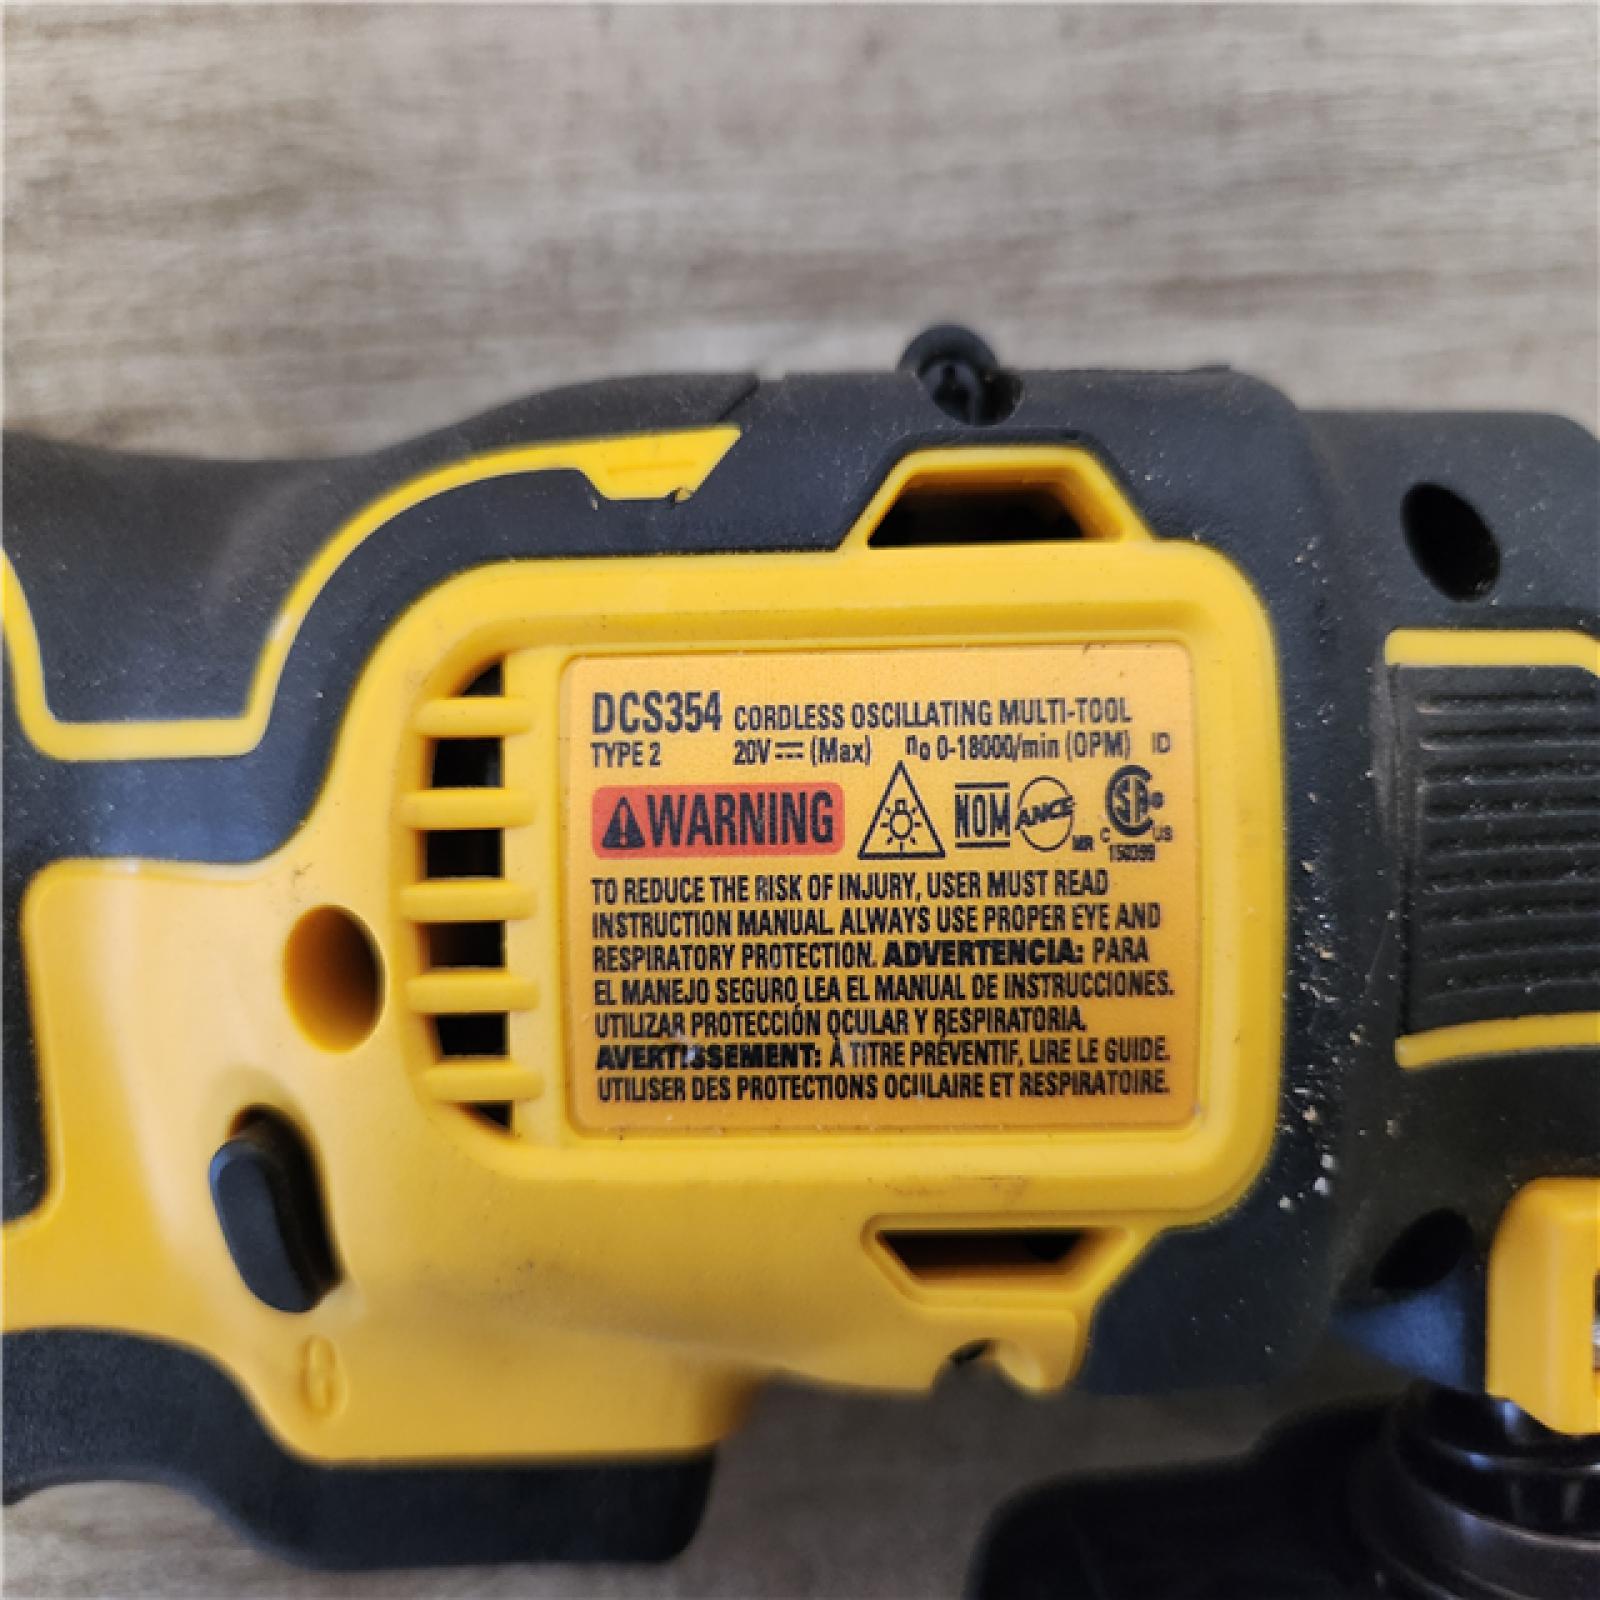 Phoenix Location Appears NEW DEWALT 20-Volt MAX Lithium-Ion Cordless 7-Tool Combo Kit with 2.0 Ah Battery, 5.0 Ah Battery and Charger  DCK700D1P1